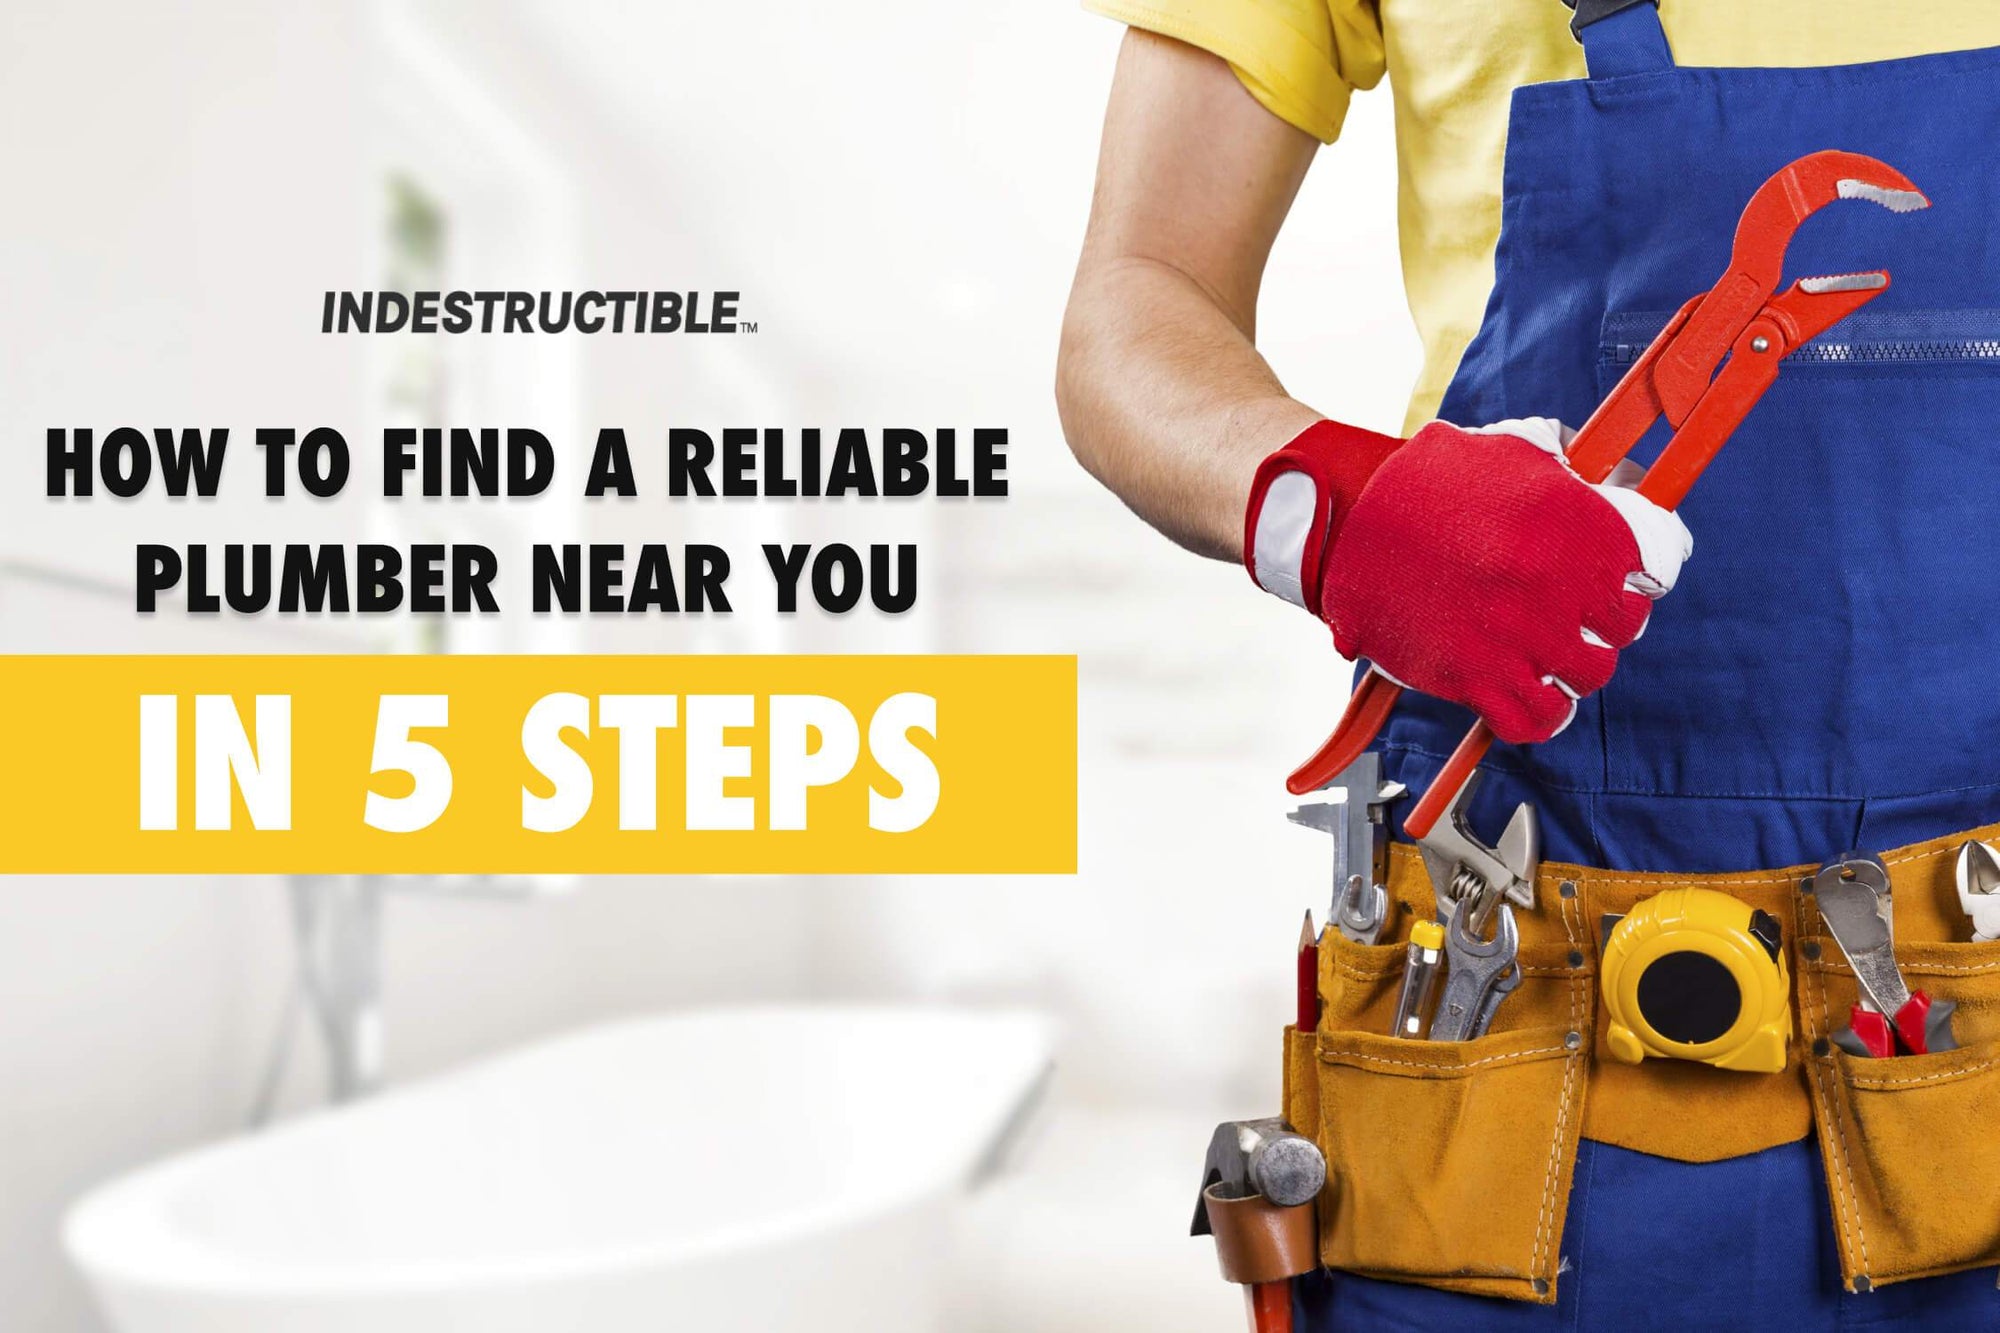 How To Make Sure You Find a Reliable Plumber